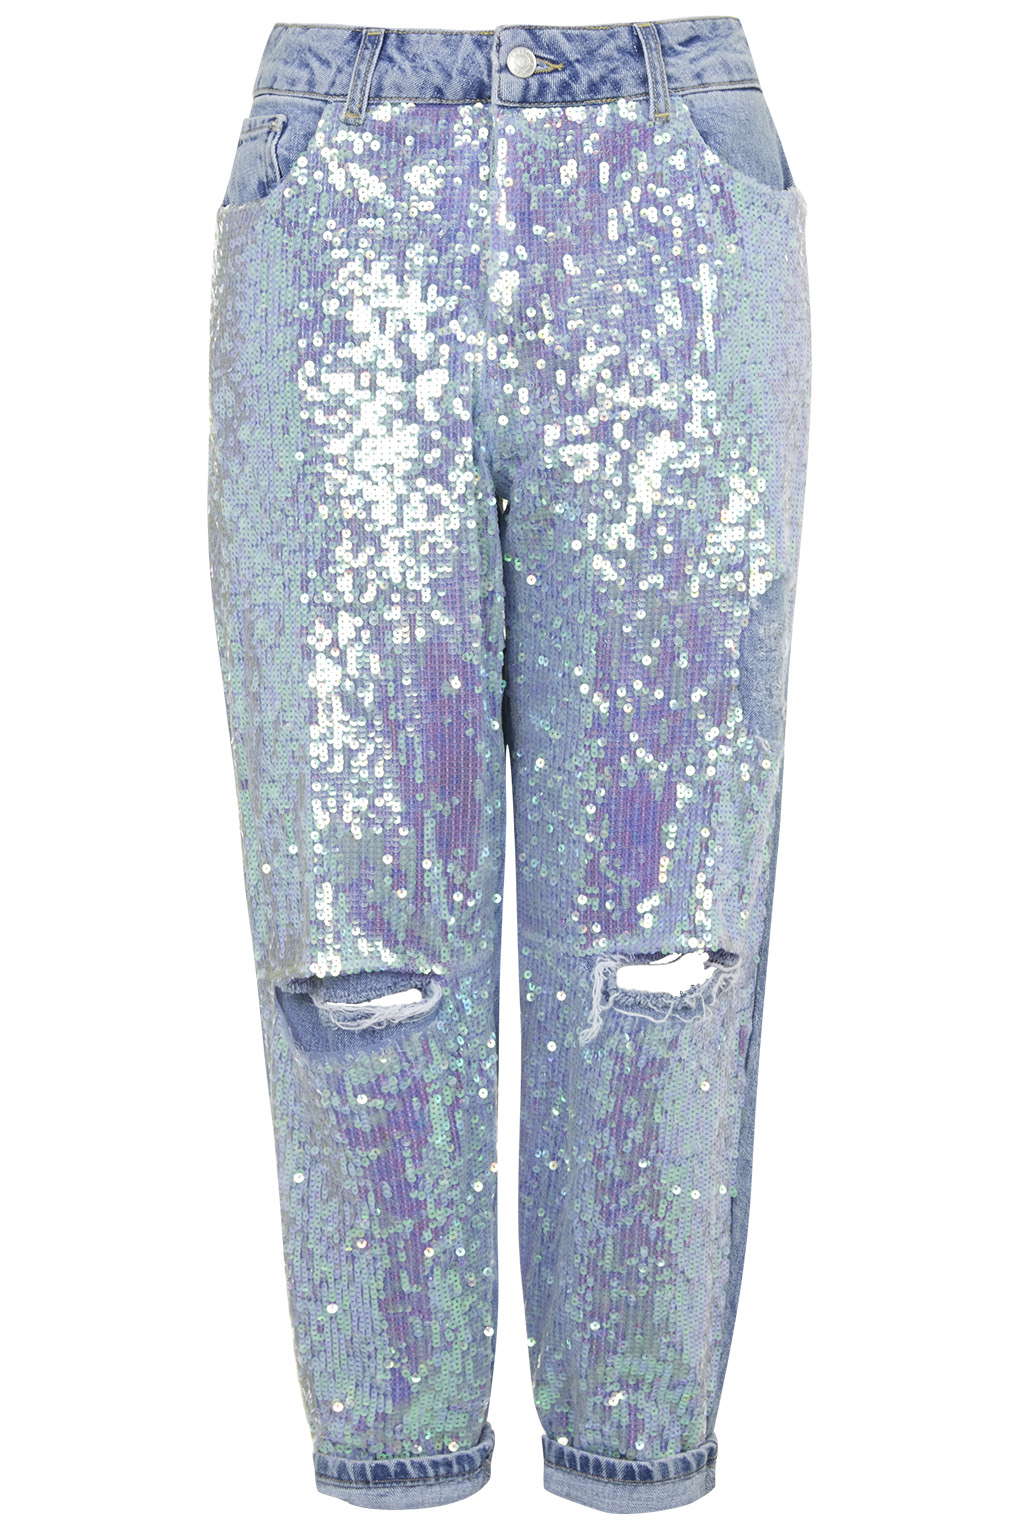 Bomb Product of the Day: Topshop’s Moto Sequin Boyfriend Jeans